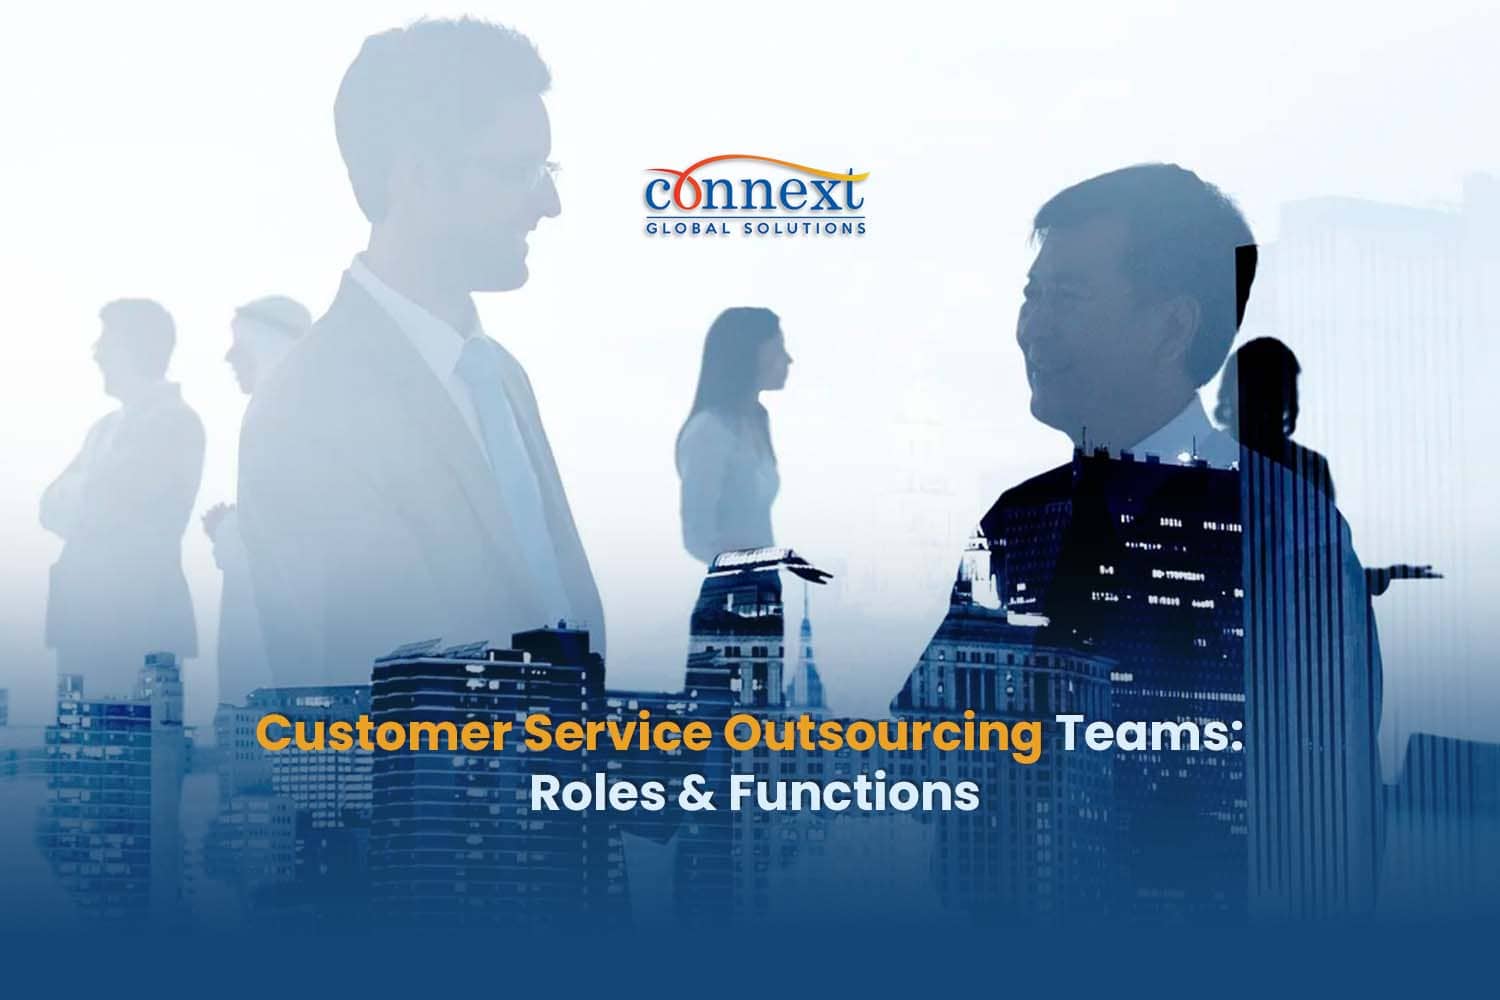 Customer Service Outsourcing Teams: Roles & Functions